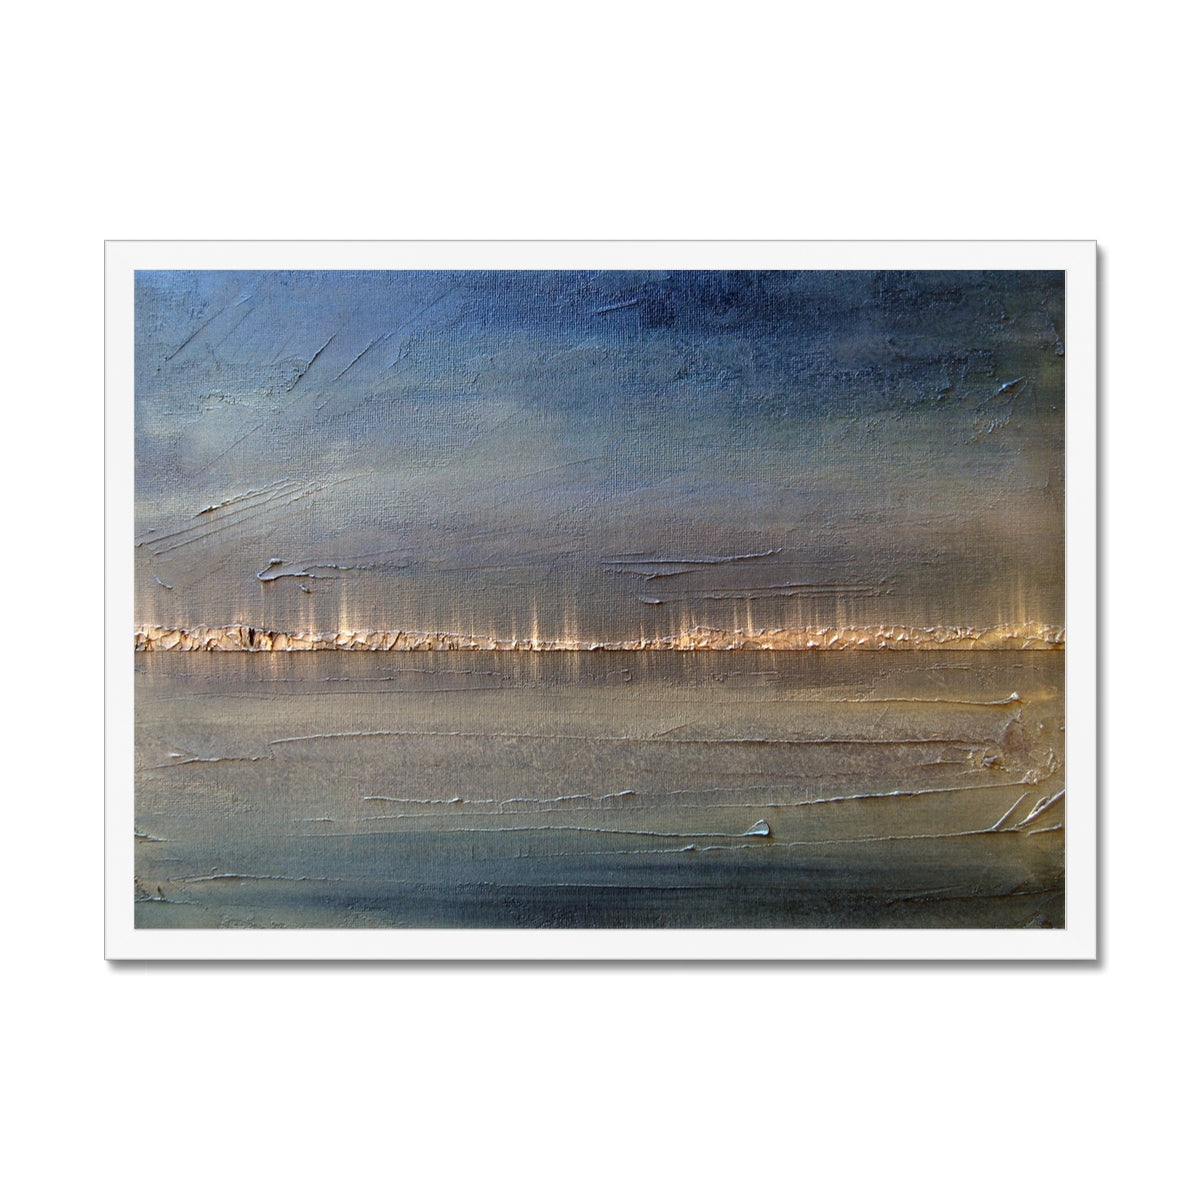 Distant Lights Lake Ontario Painting | Framed Prints From Scotland-Framed Prints-World Art Gallery-A2 Landscape-White Frame-Paintings, Prints, Homeware, Art Gifts From Scotland By Scottish Artist Kevin Hunter